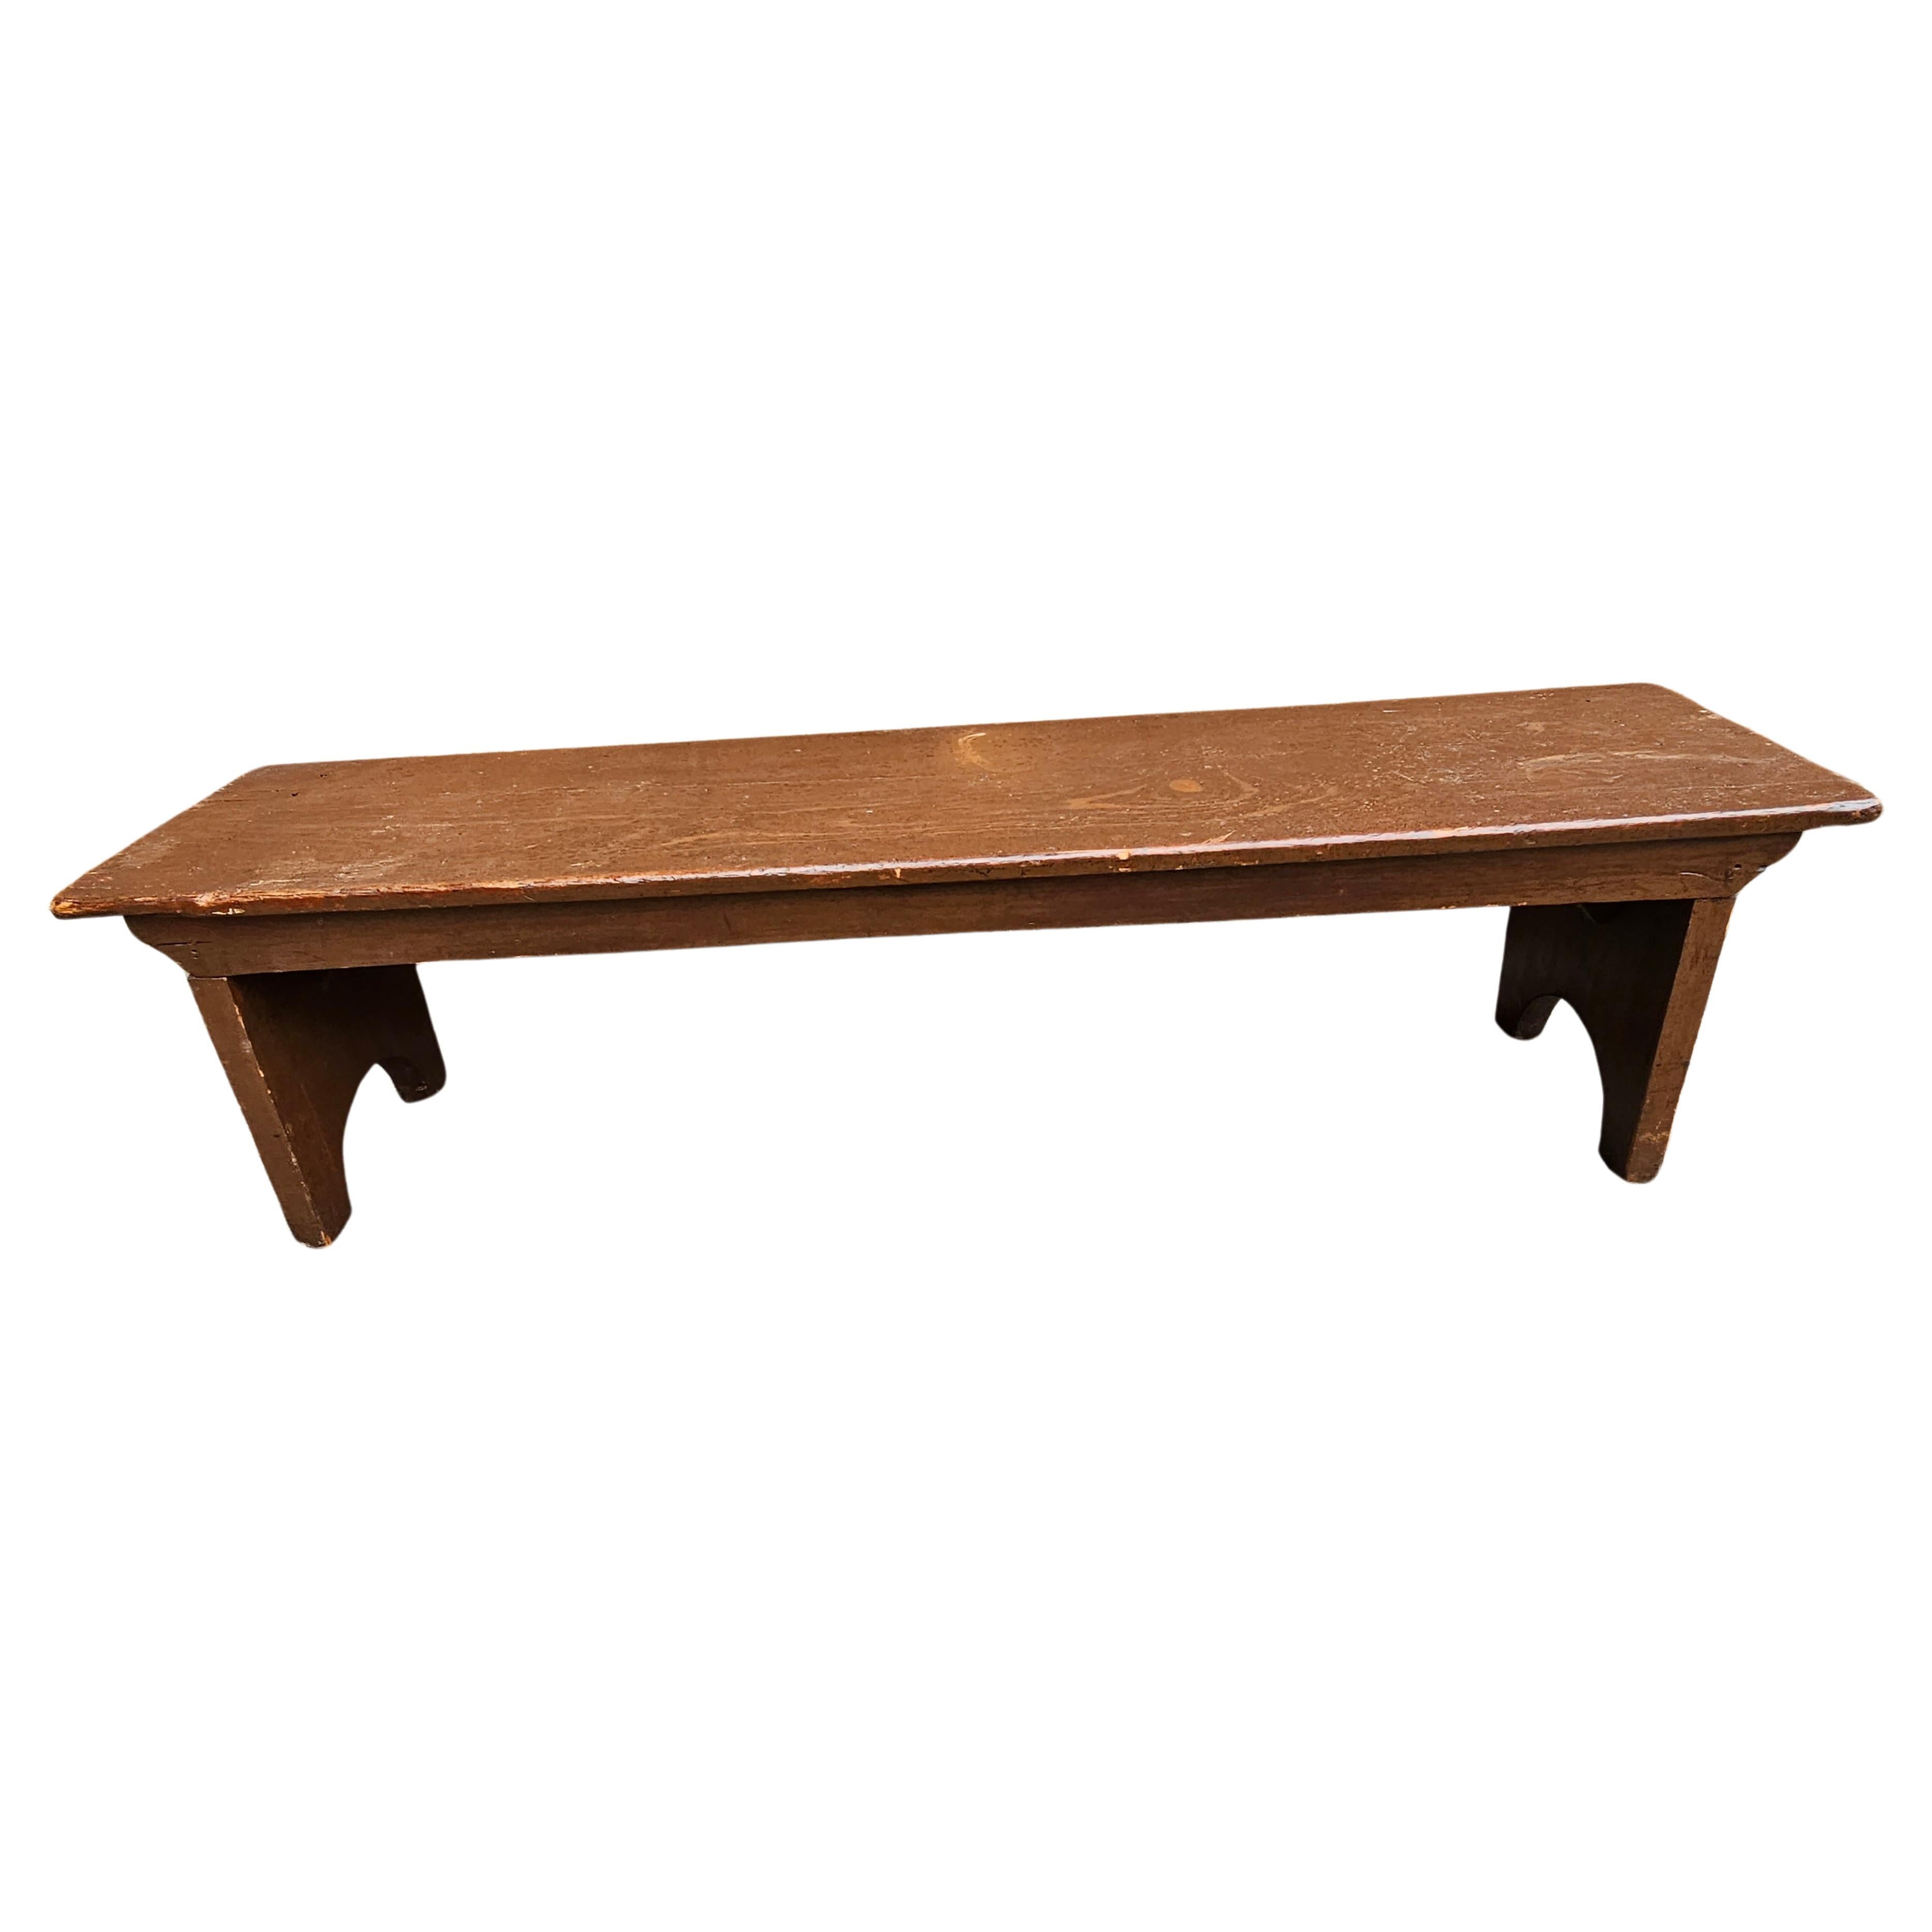 https://a.1stdibscdn.com/early-20th-century-handcrafted-american-colonial-elm-low-bench-for-sale/f_57512/f_372164521700716545523/f_37216452_1700716546576_bg_processed.jpg